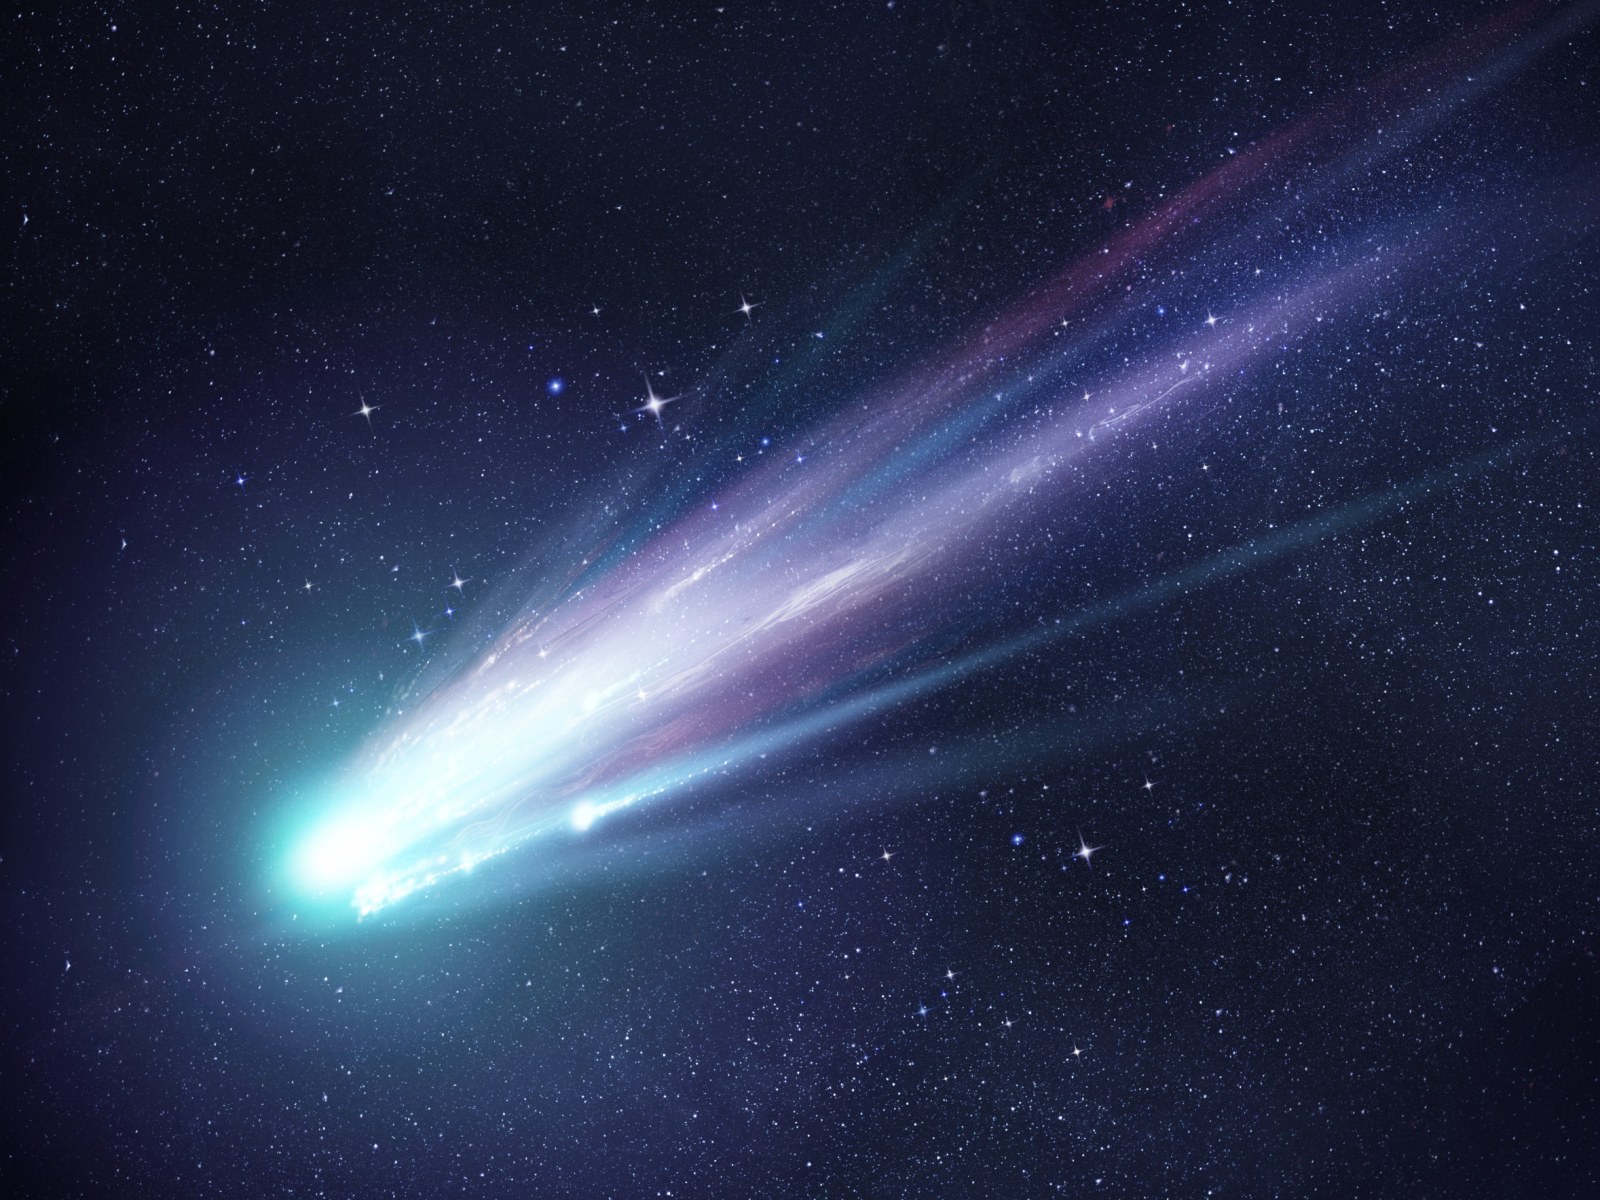 What Makes the Green Comet Green?